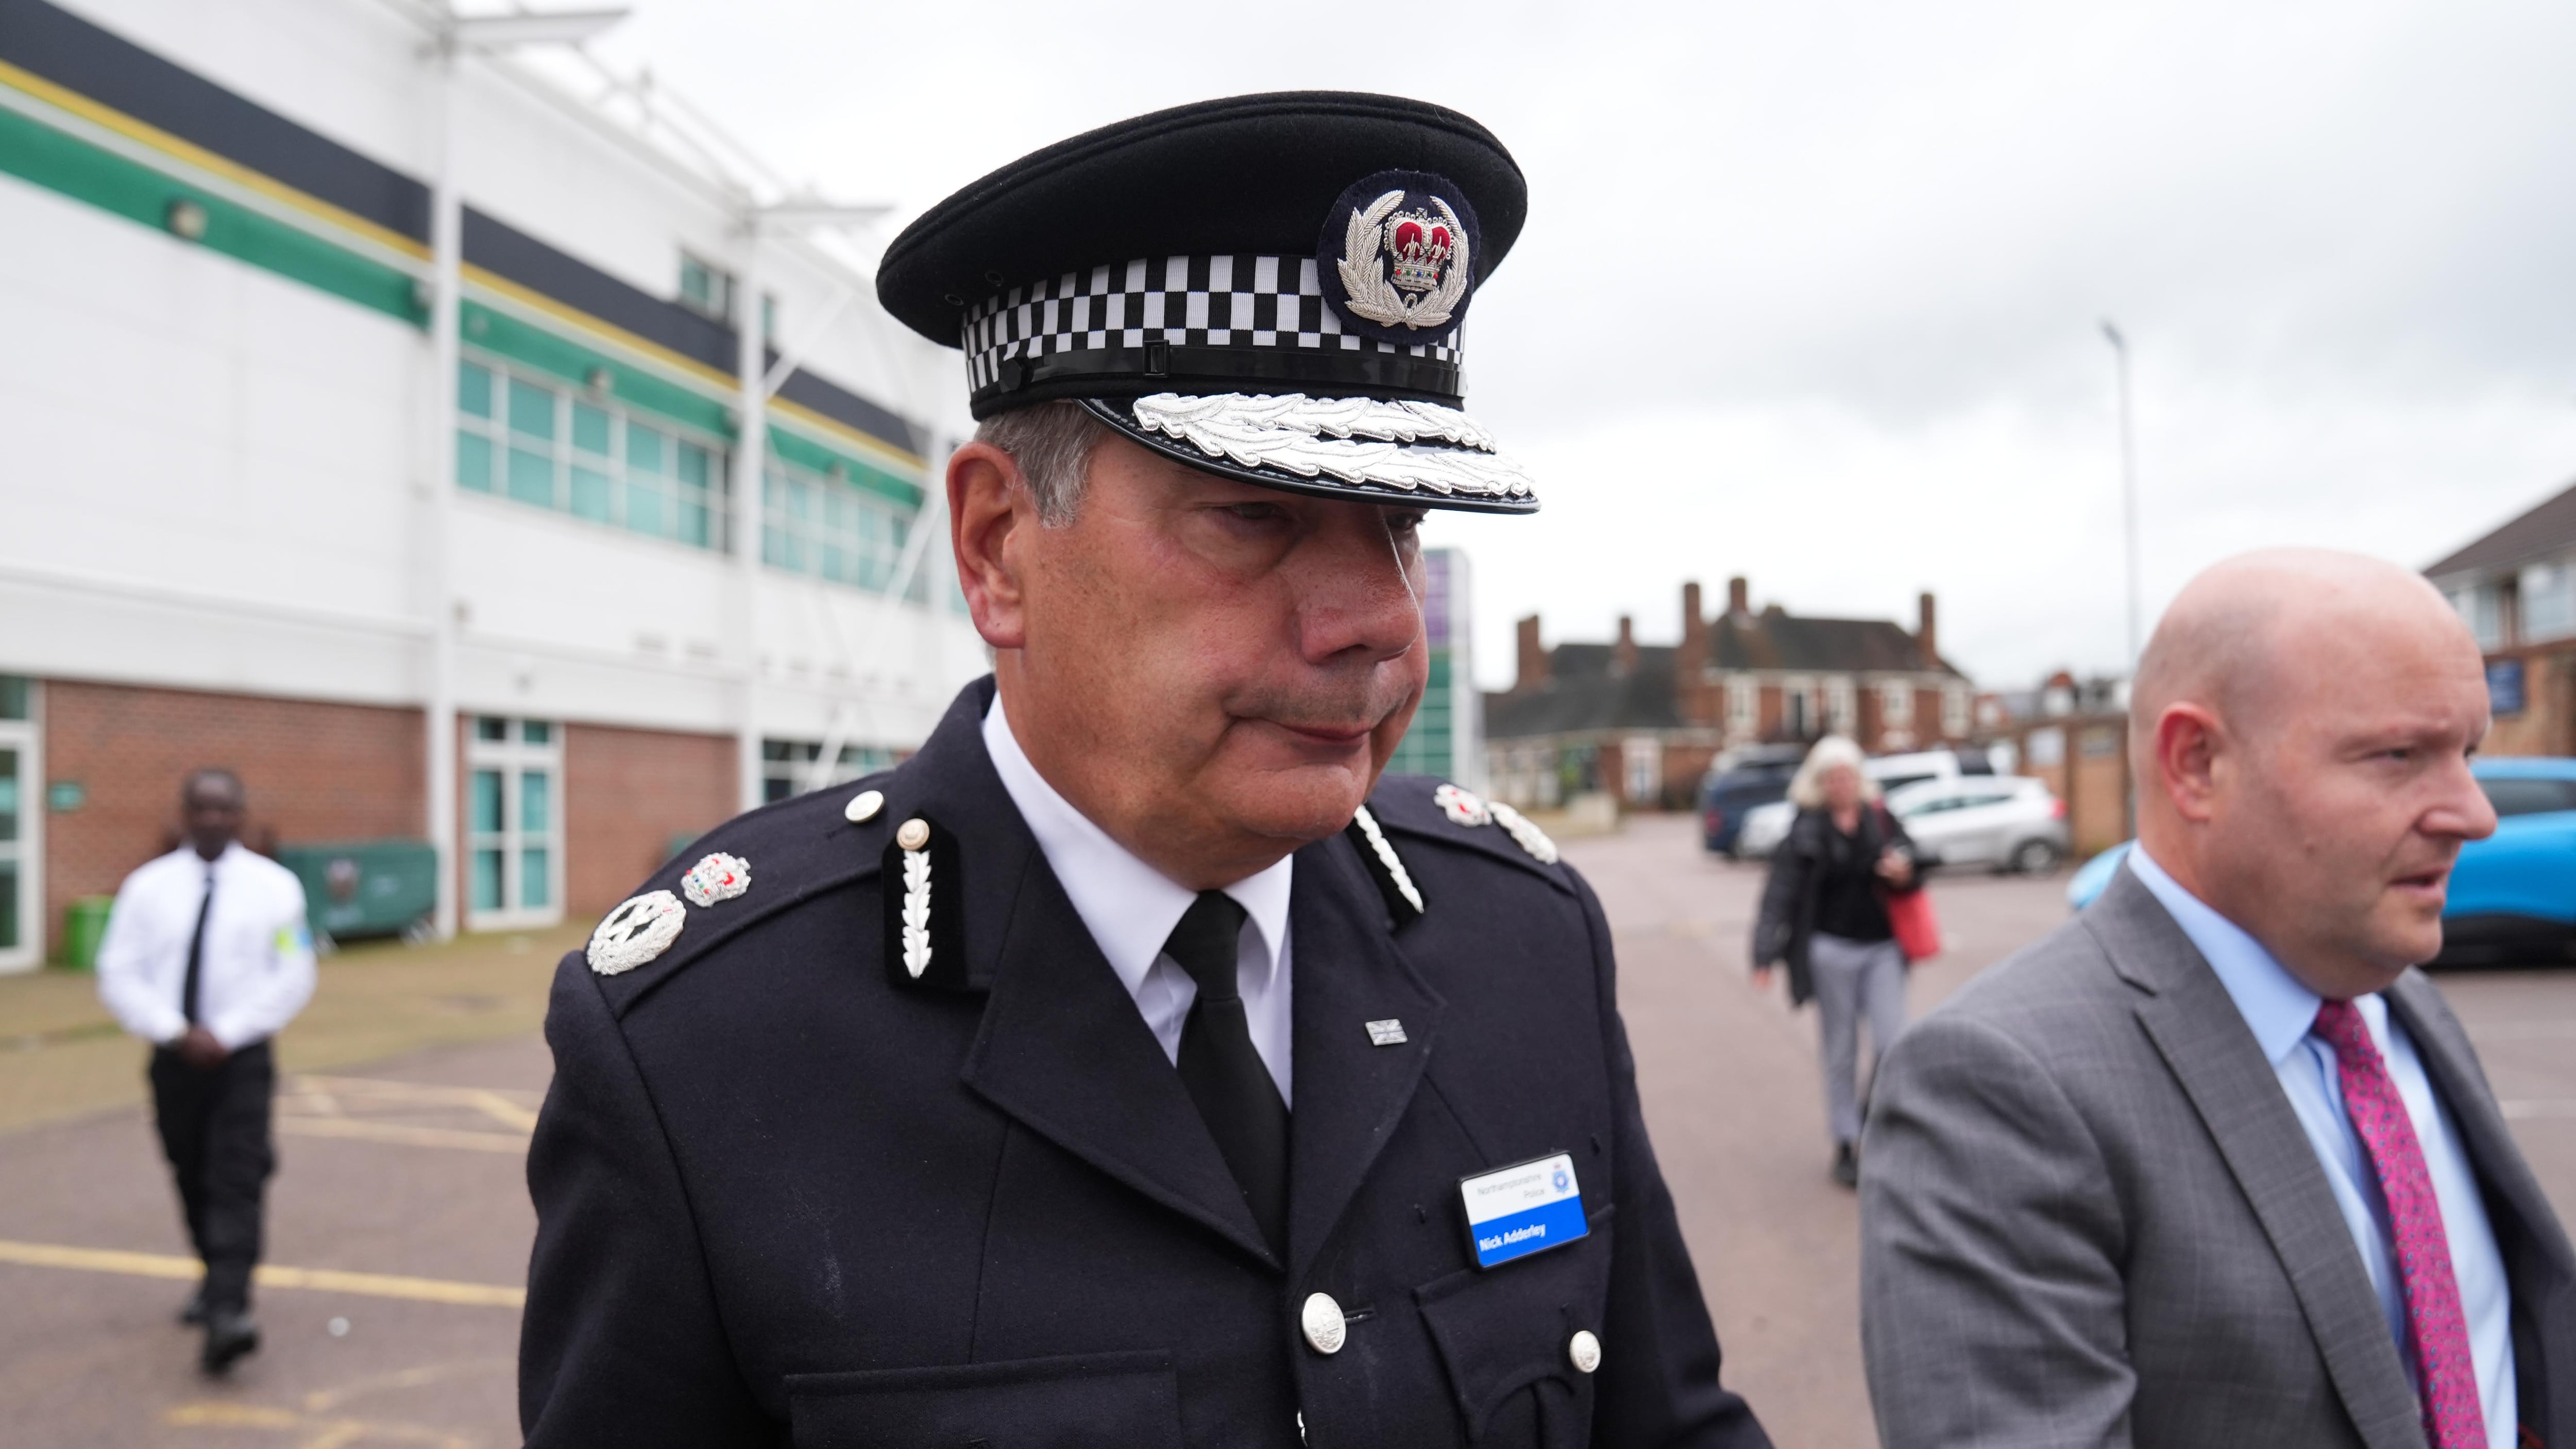 Suspended chief constable Nick Adderley did not attend Thursday’s hearing